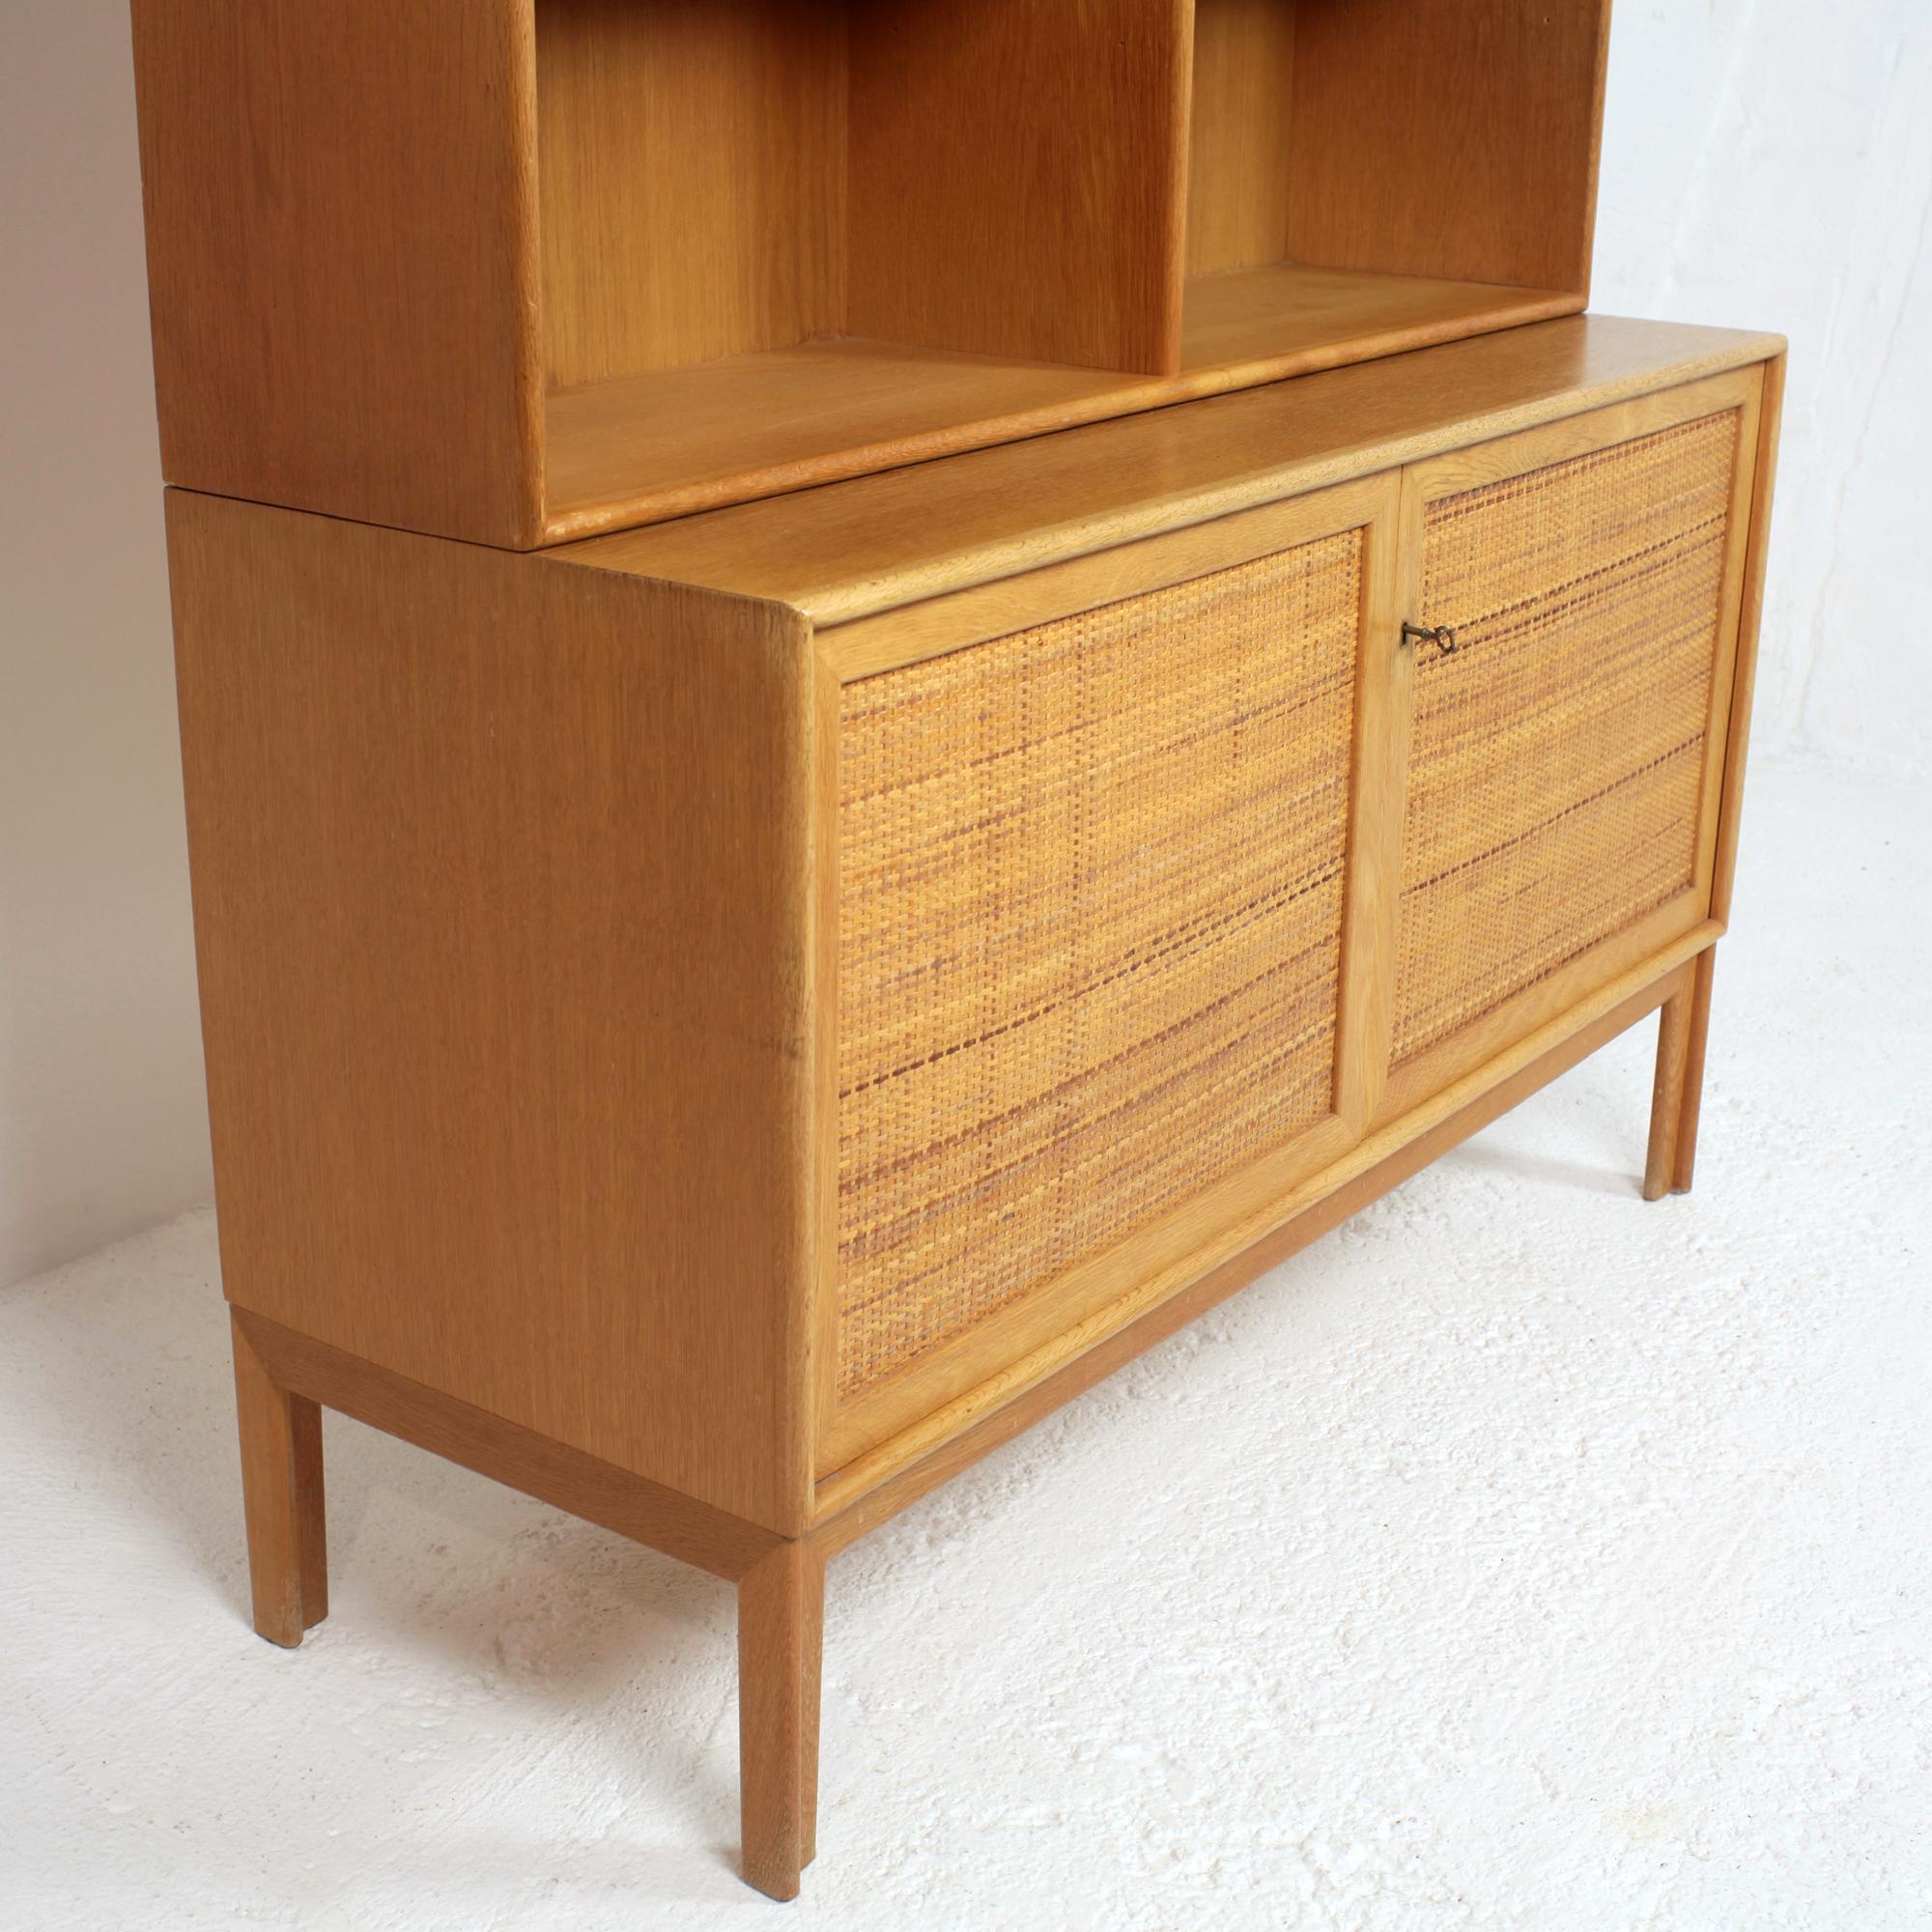 Mid-20th Century Oak & Rattan Sideboard Bookcase by Alf Svensson, 1960s For Sale